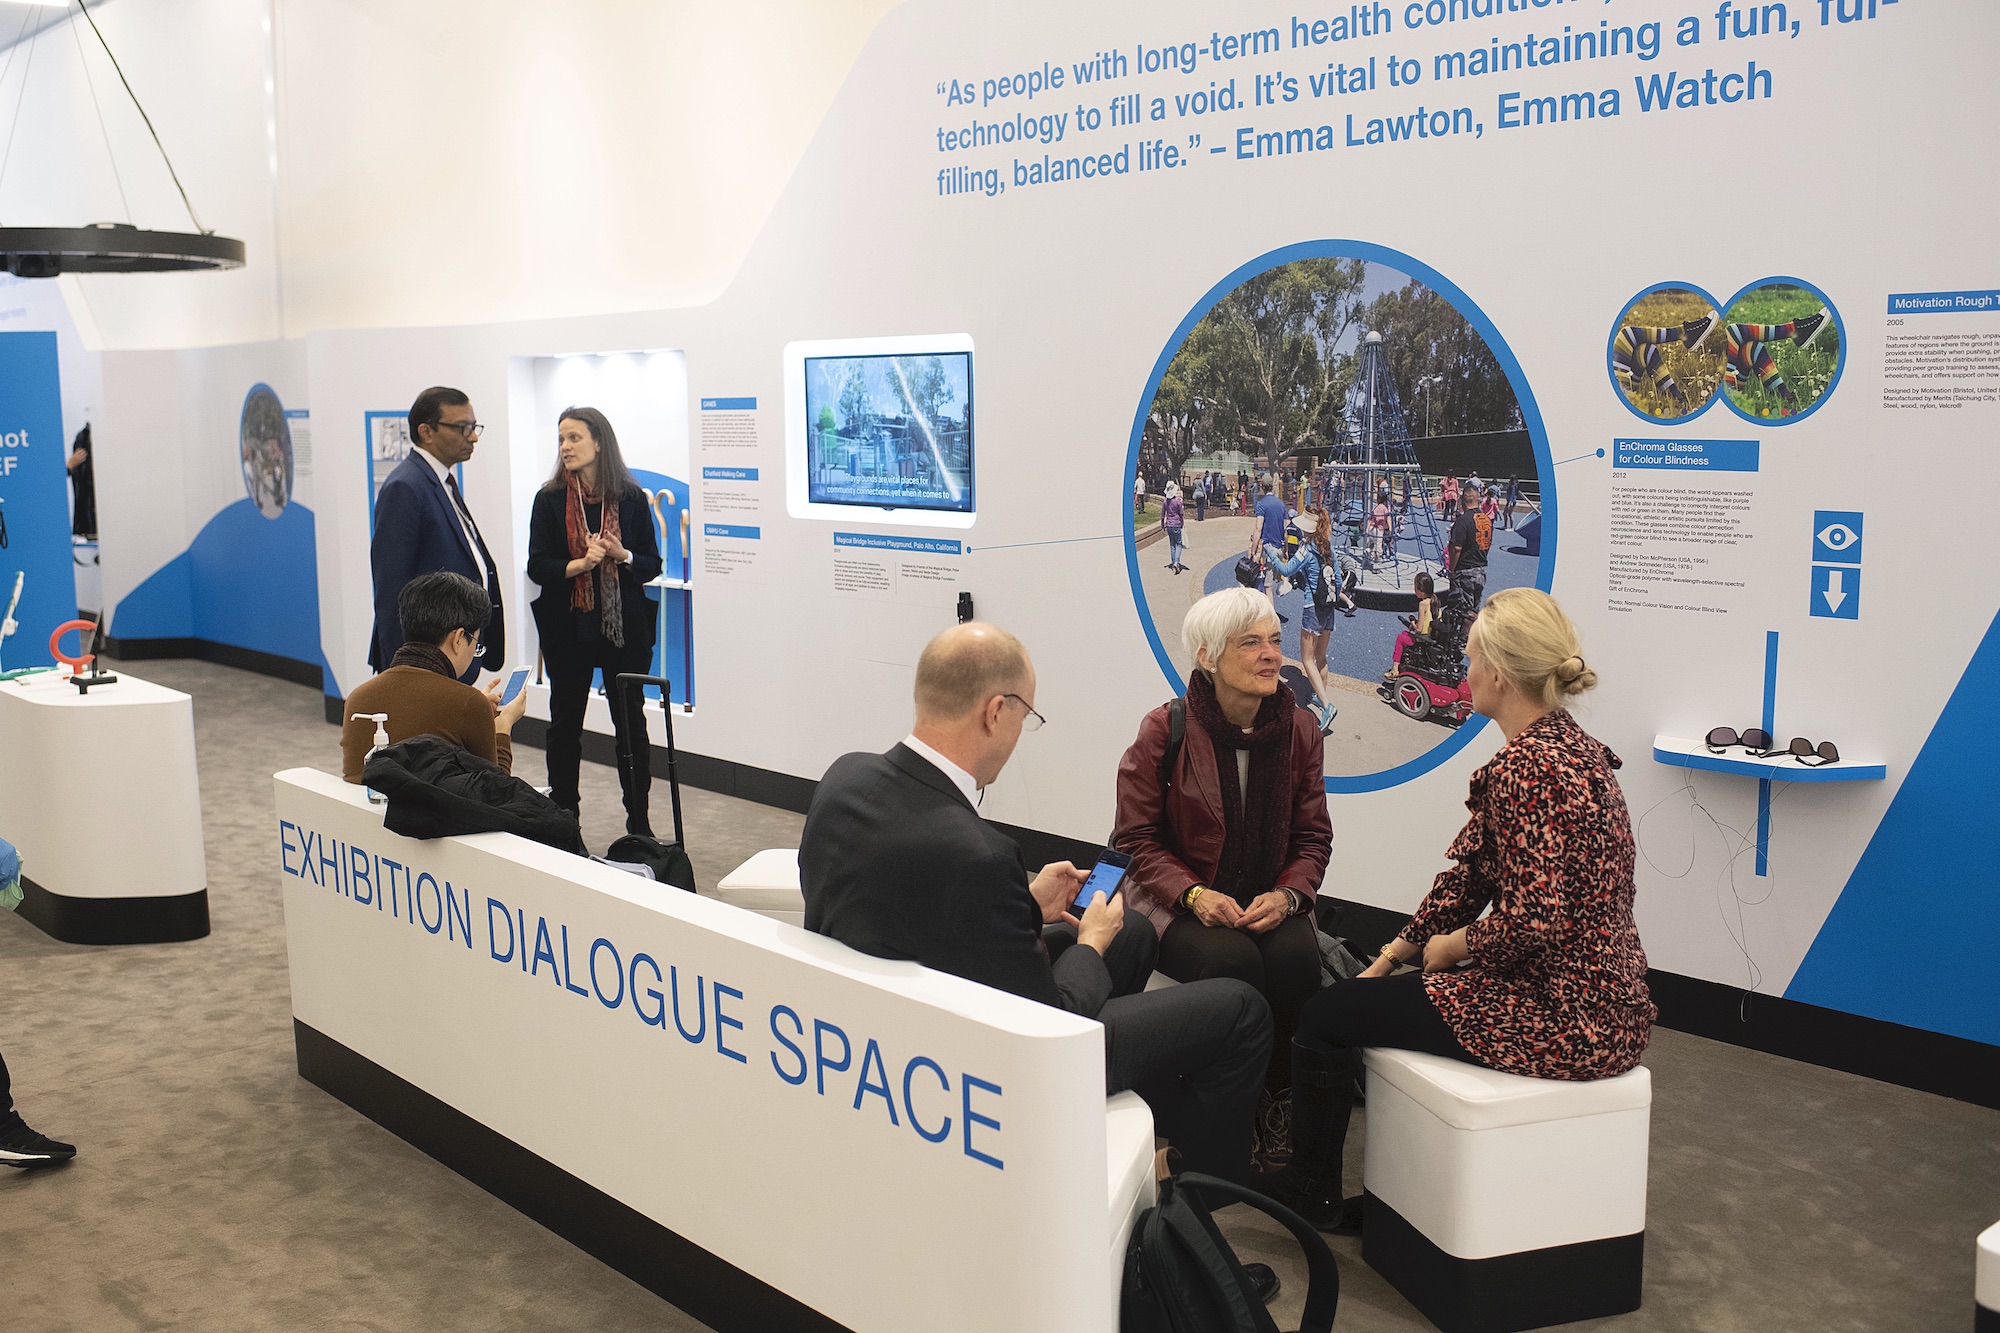 A group of people are gathered in an area labeled “Exhibition Dialogue Space” next to a blue and white wall full of images, video, and text.